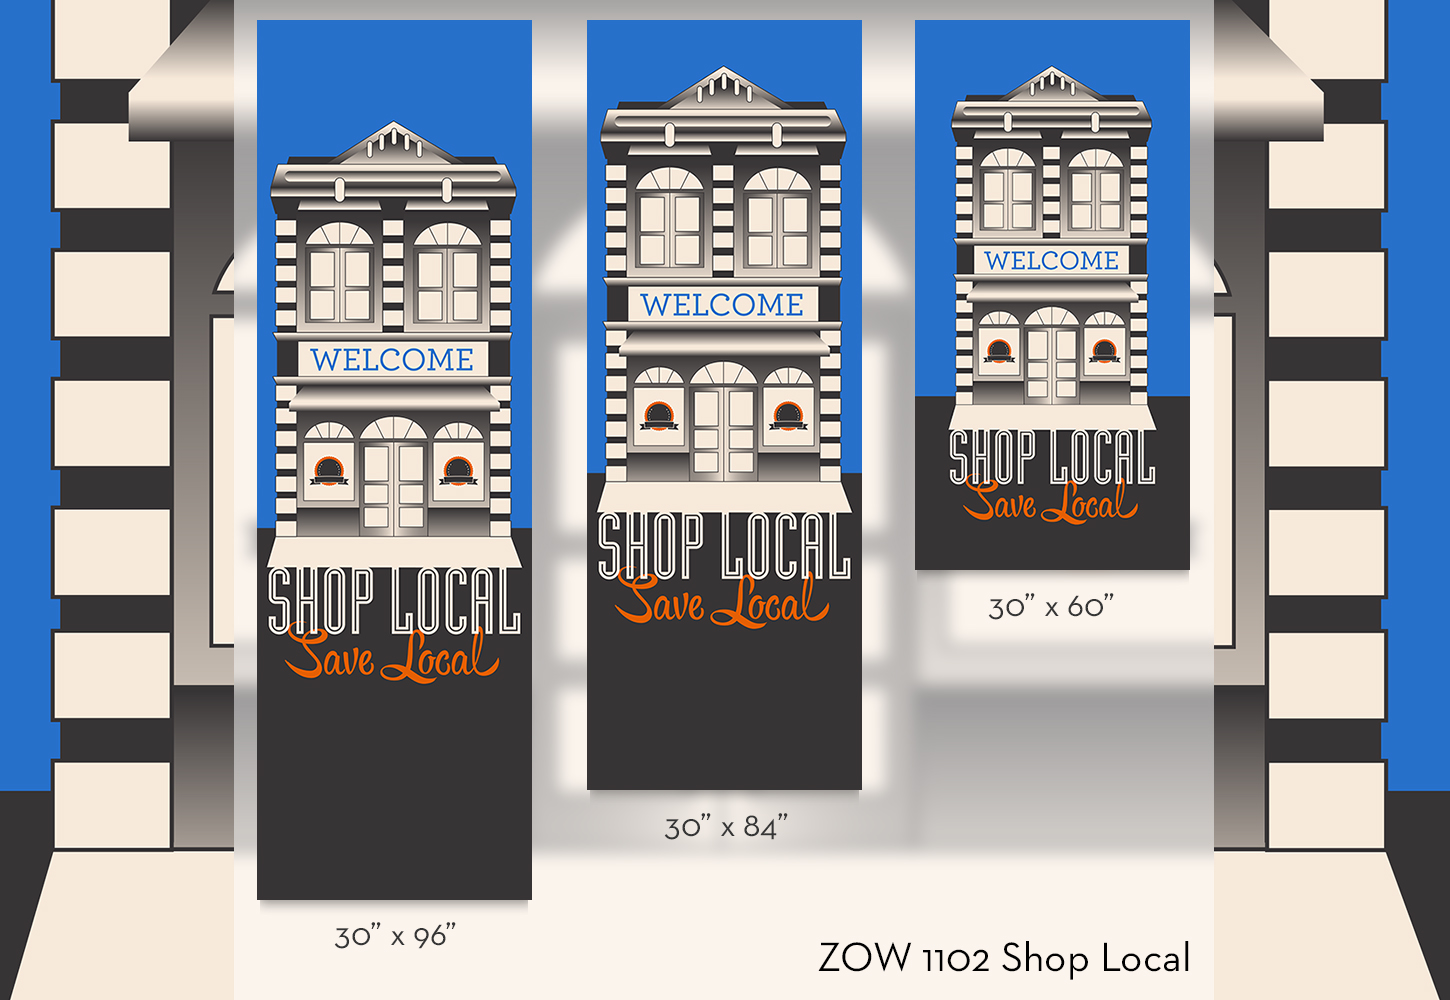 ZOW 1102 Shop Local